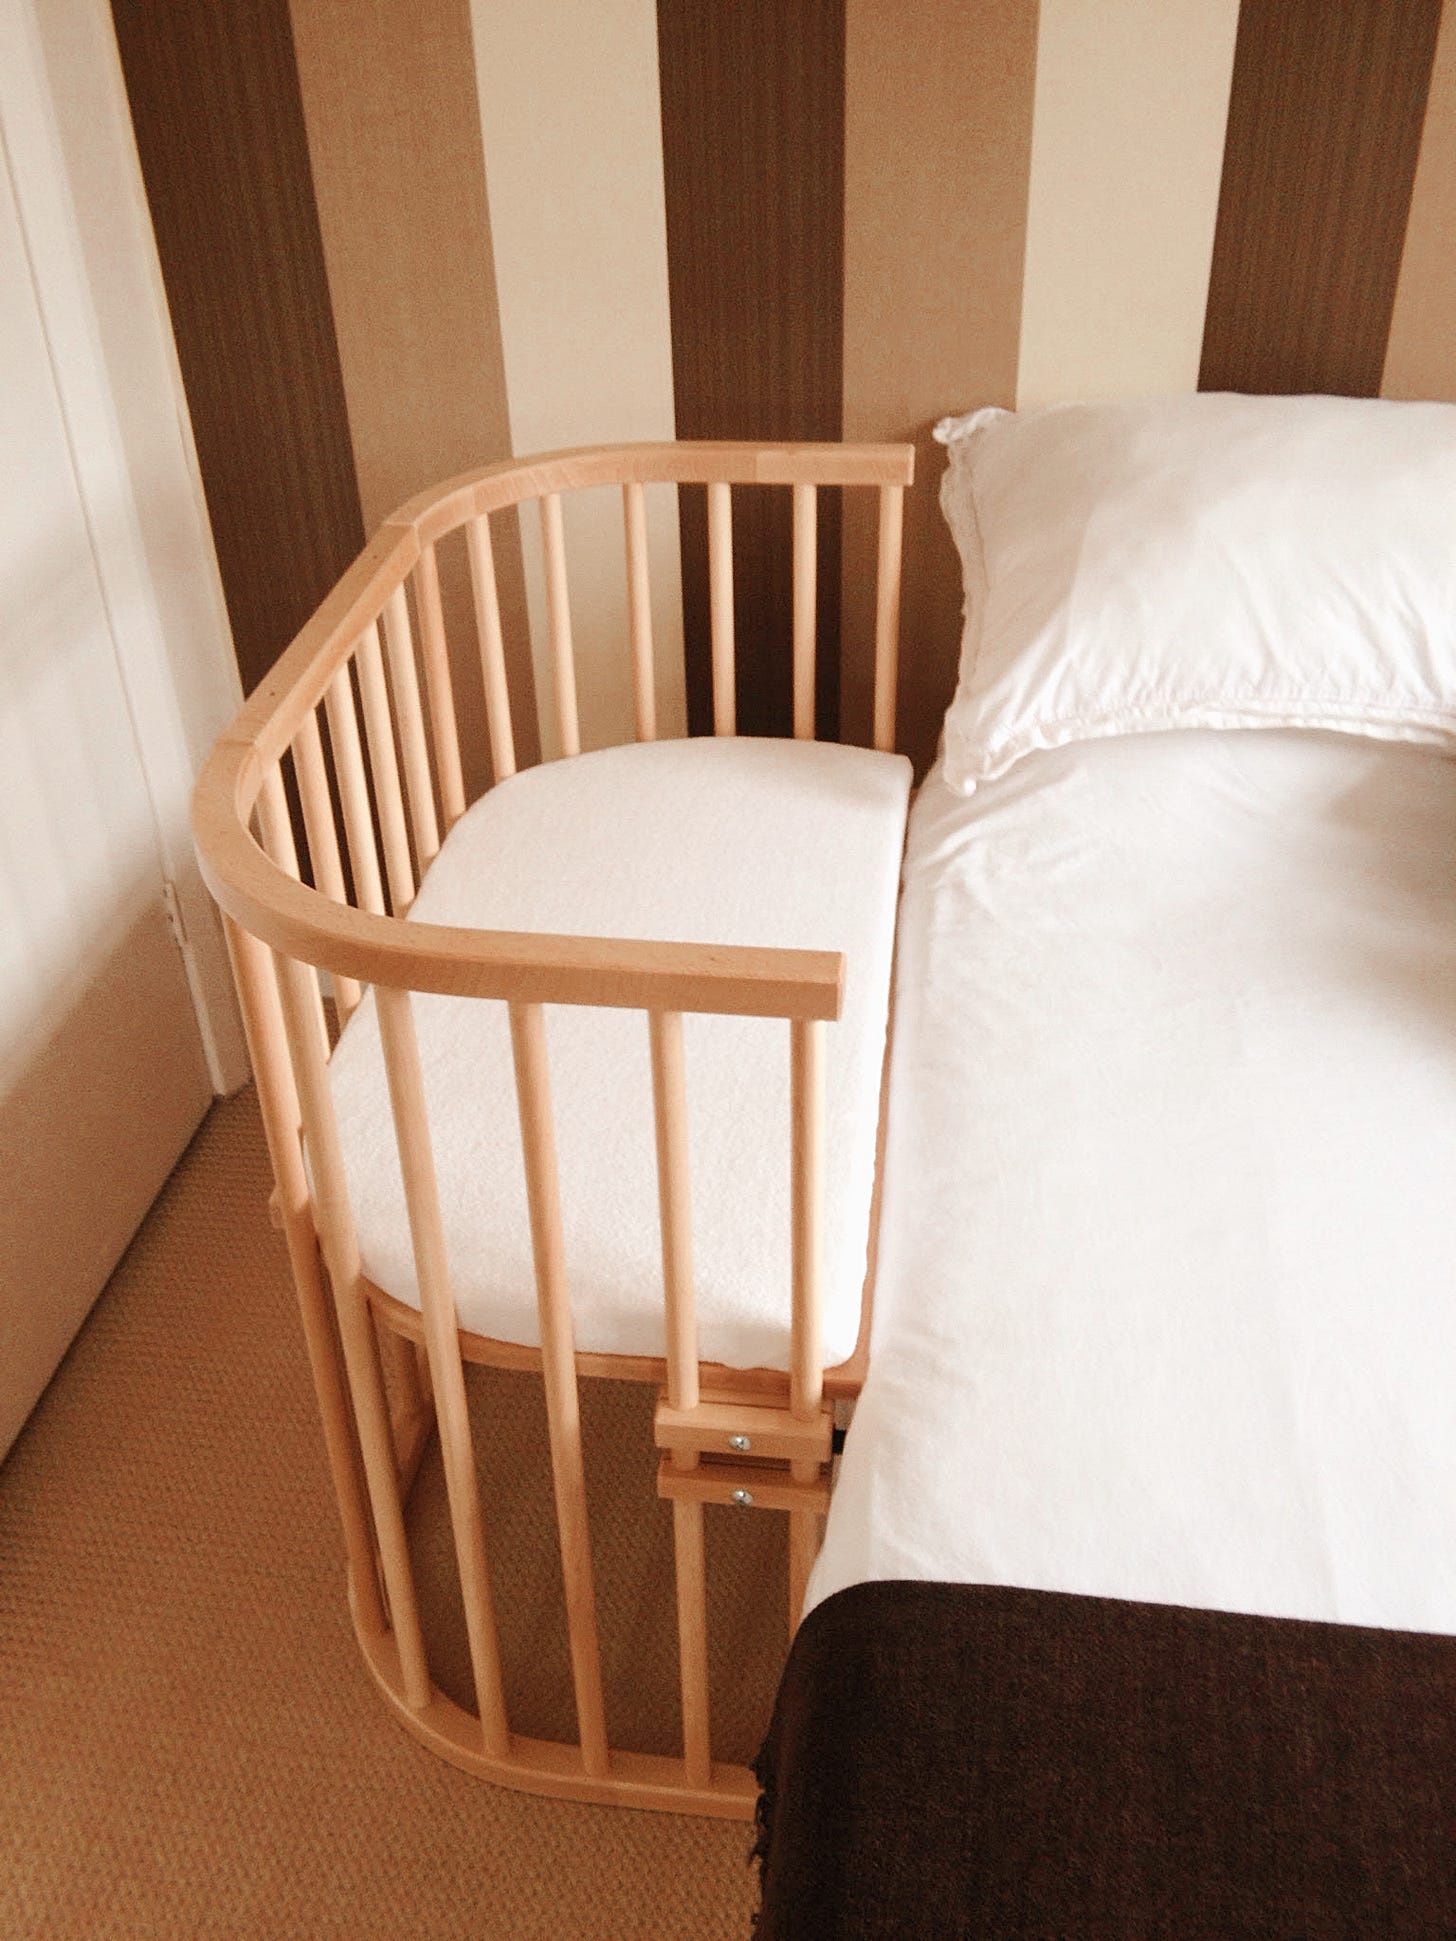 A bedside cot is alongside a bed with white linen